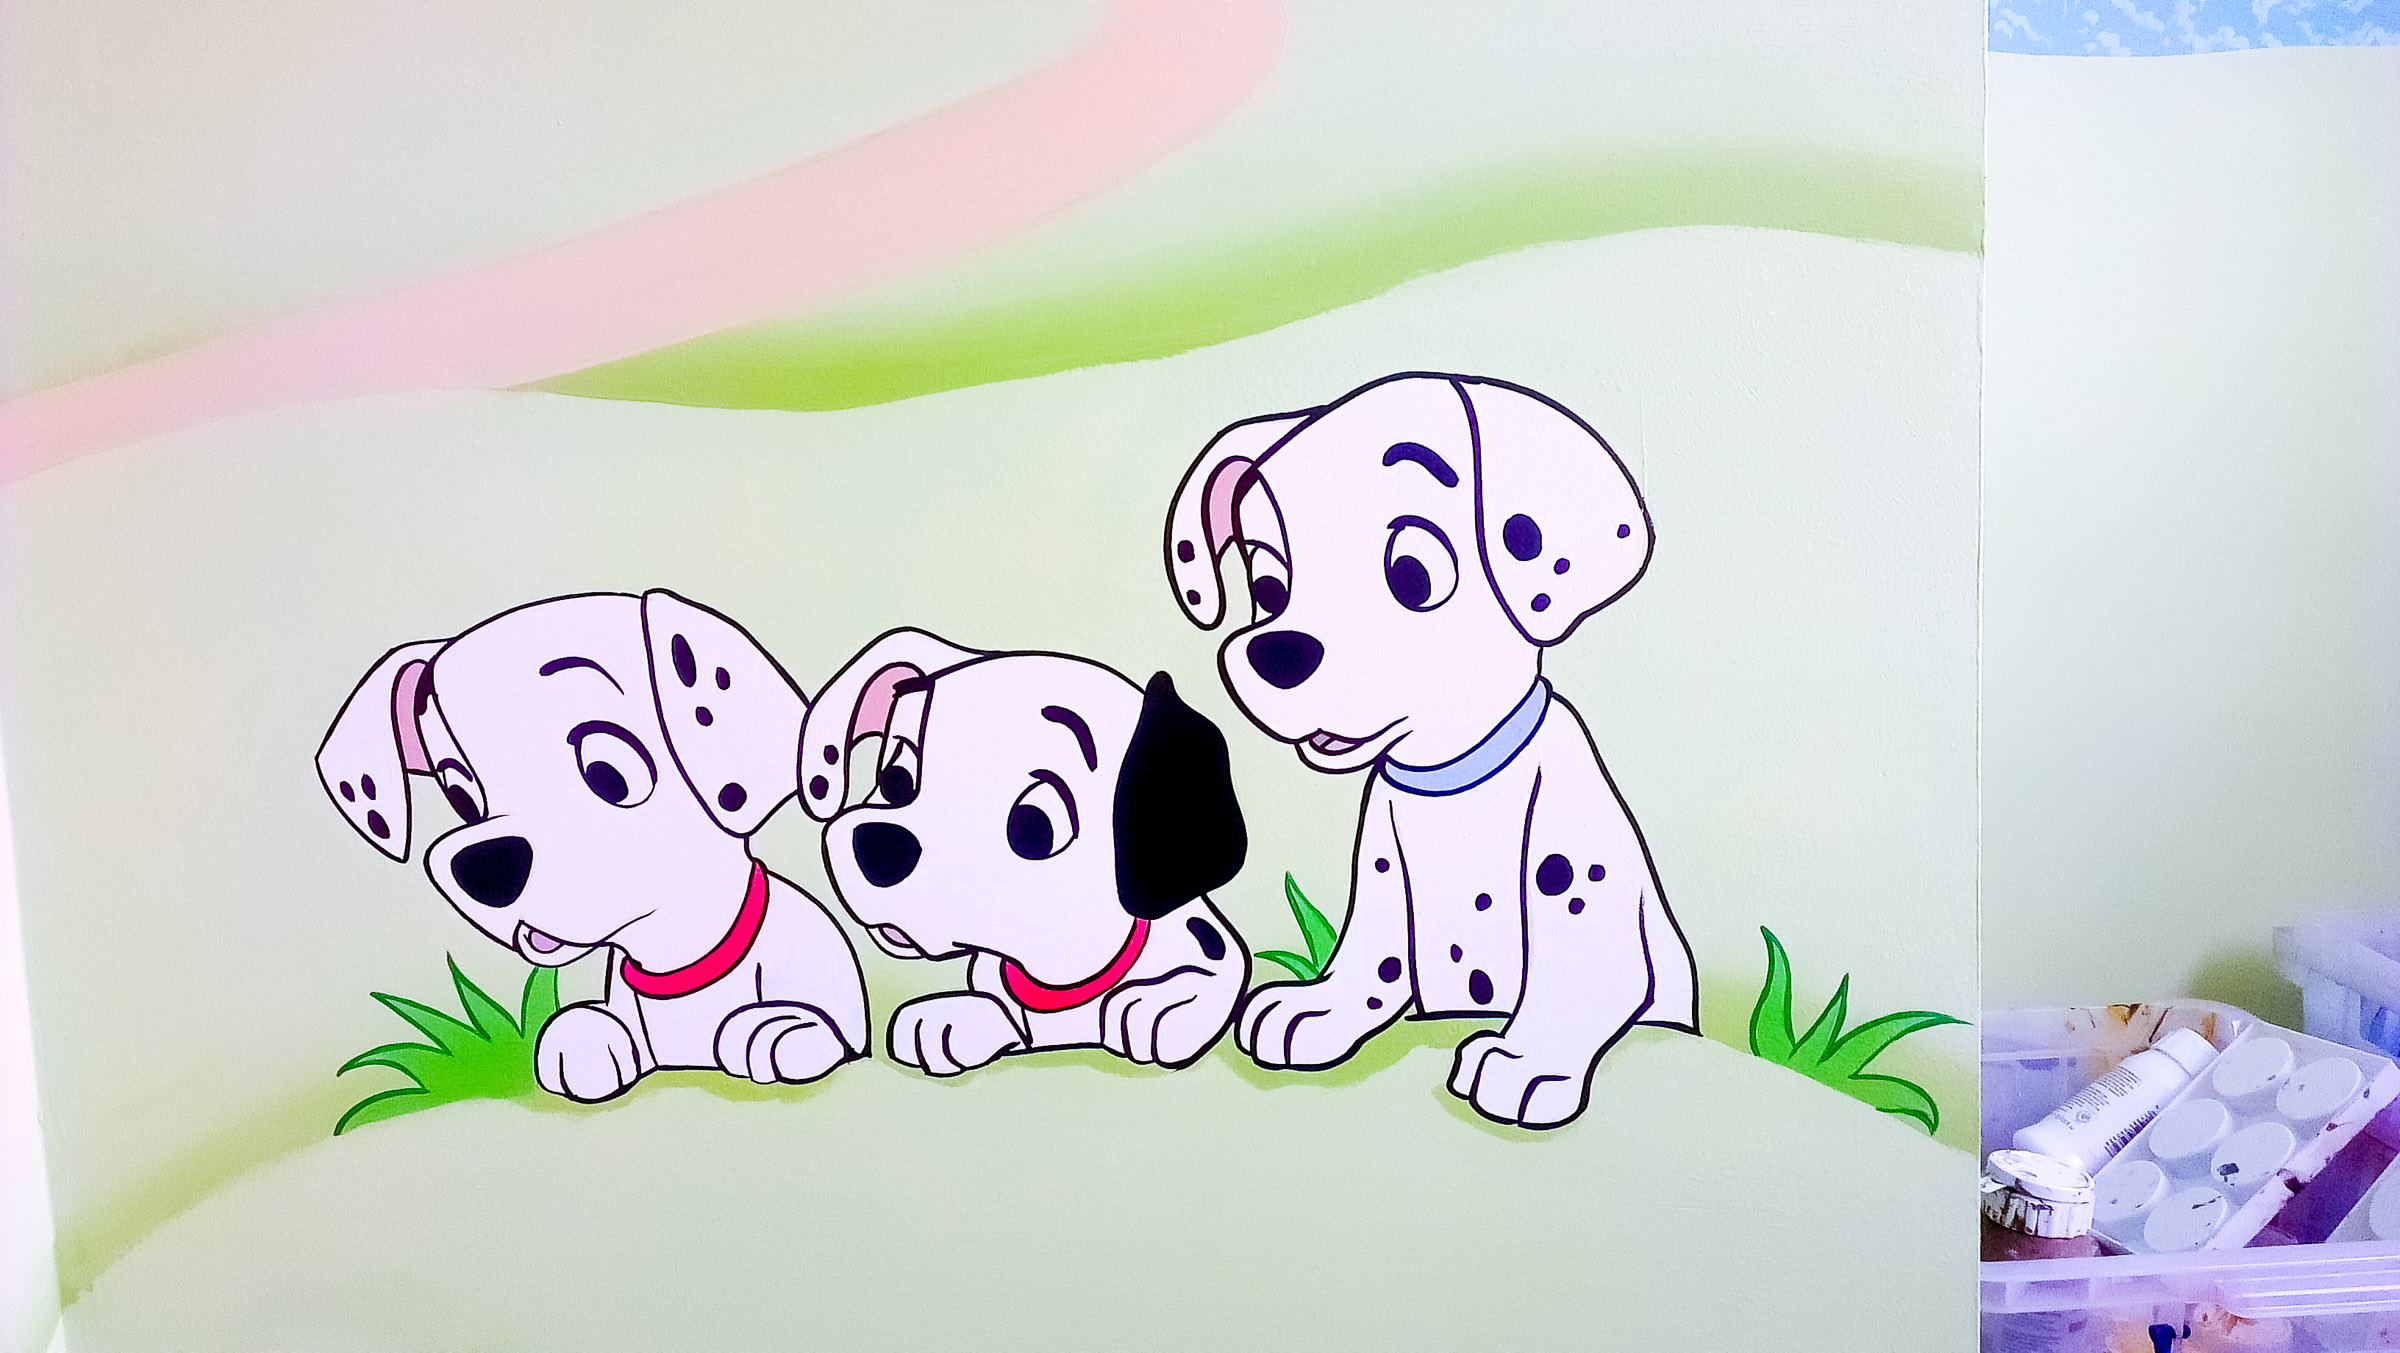 Puppies from 101 Dalmations